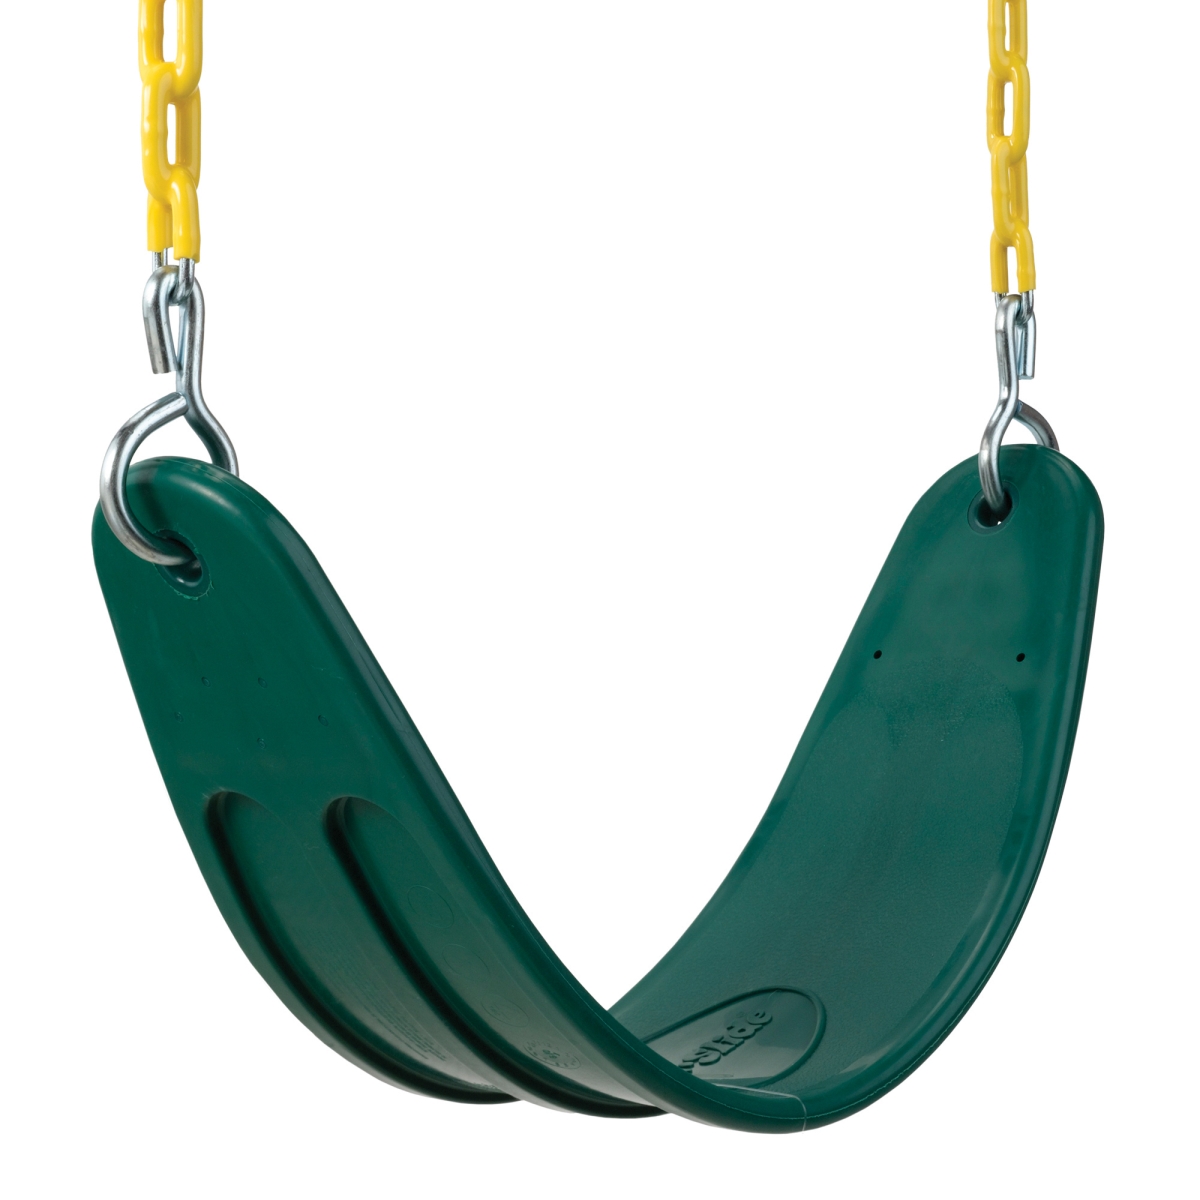 04-0039-g-y Extreme Duty Swing Belt, Green With Yellow Chains